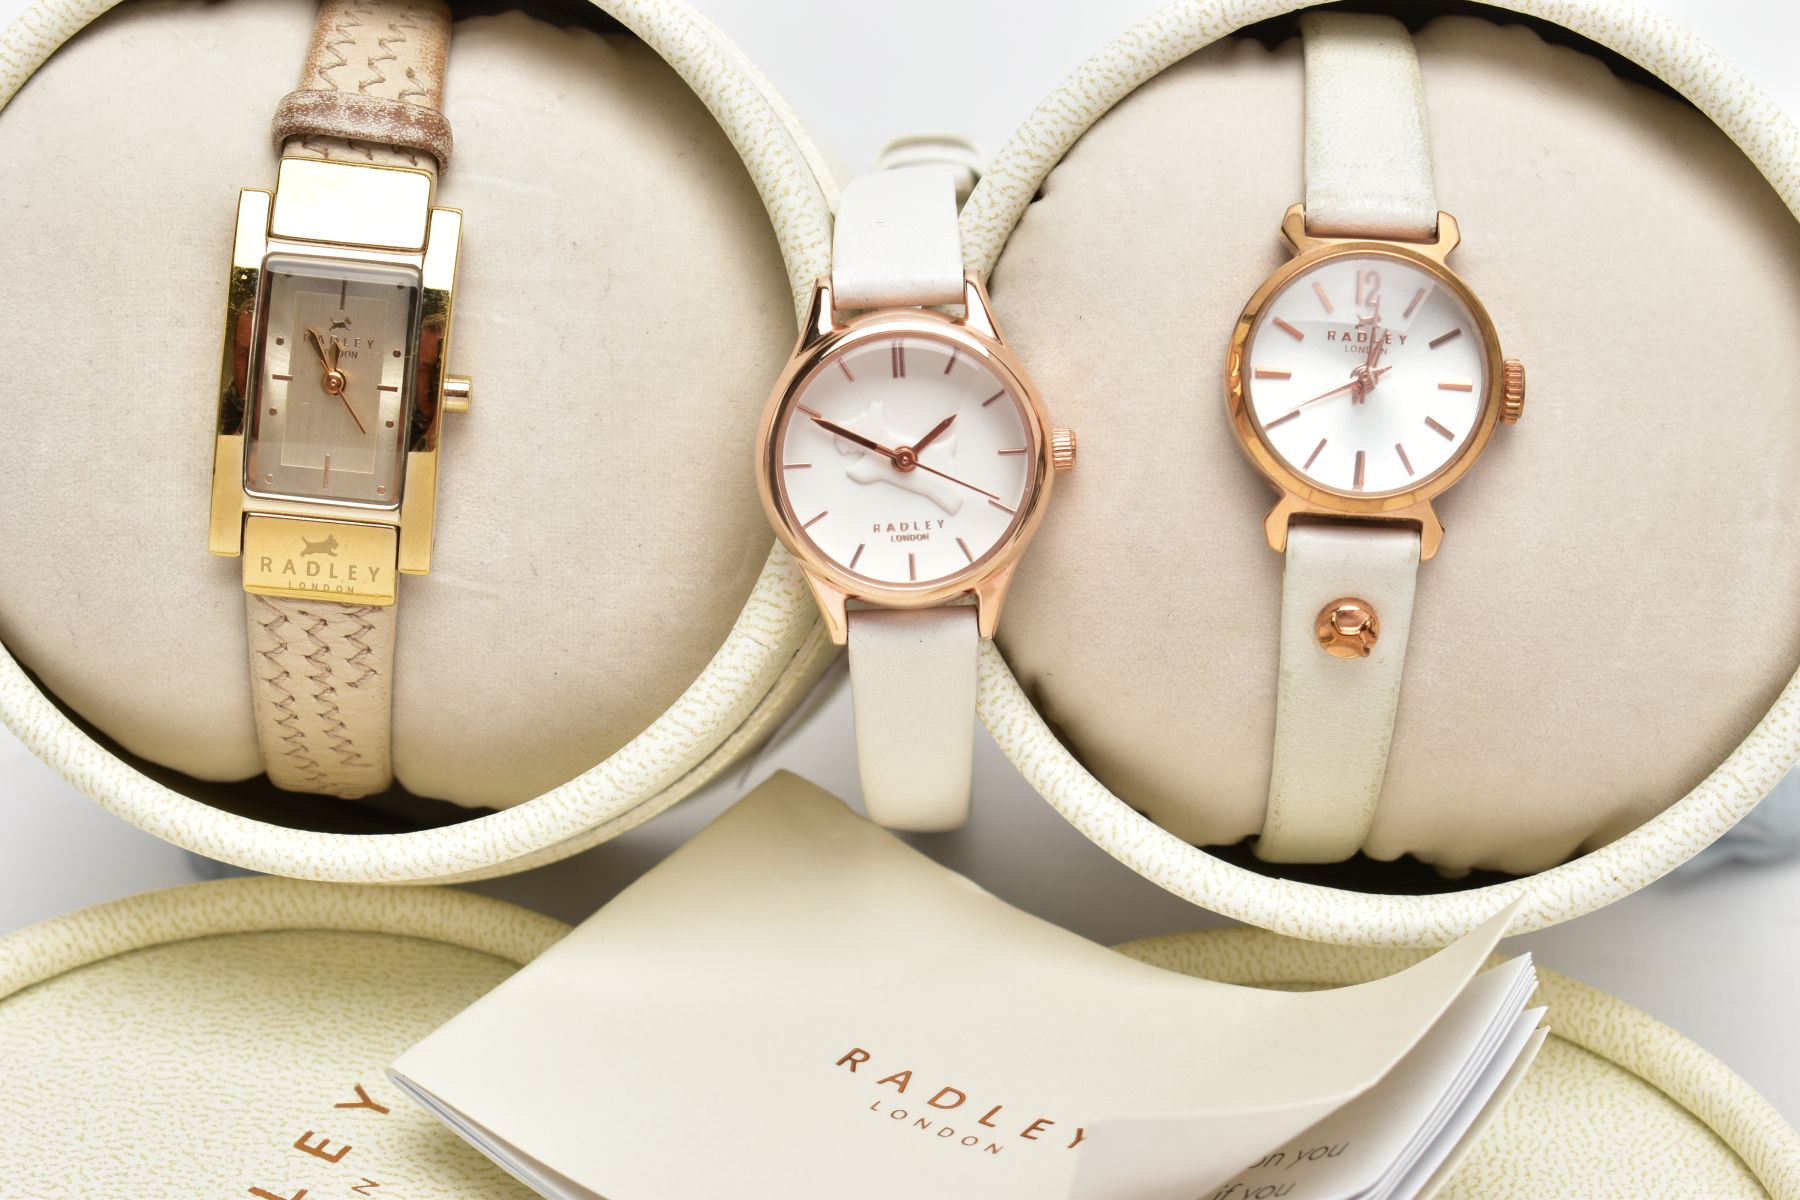 A SELECTION OF RADLEY WATCHES, one white and rose gold coloured watch, white watch face featuring